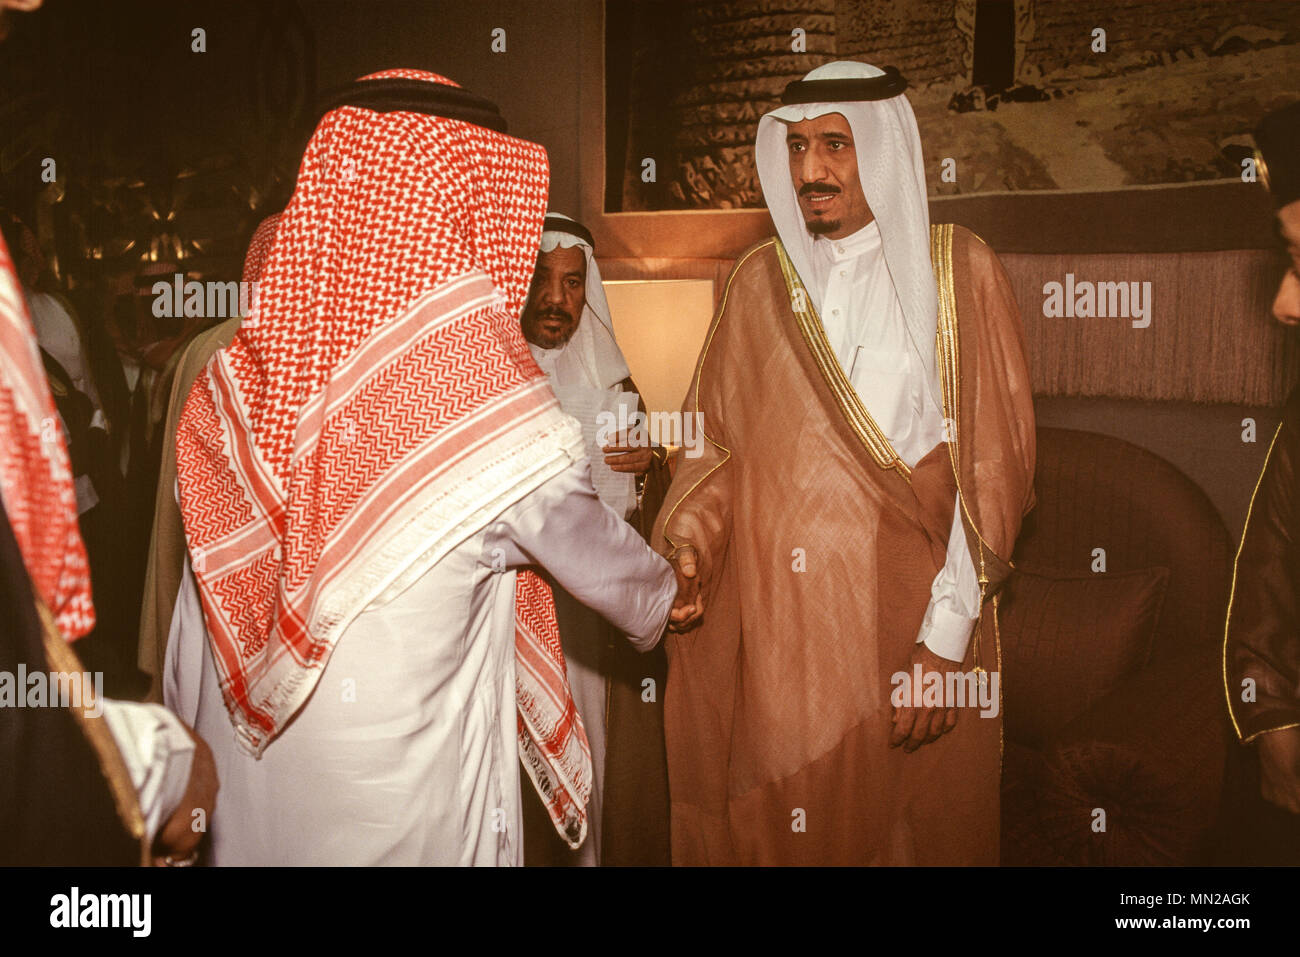 Ruler of Saudi Arabia King Salman, whilst still Governor or Riyadh Province, shown at his palace in Riyadh in 1991 during his weekly audience with Saudi citizens.   Prince Salman succeeded King Abdullah to the throne on January 22, 2015. Stock Photo